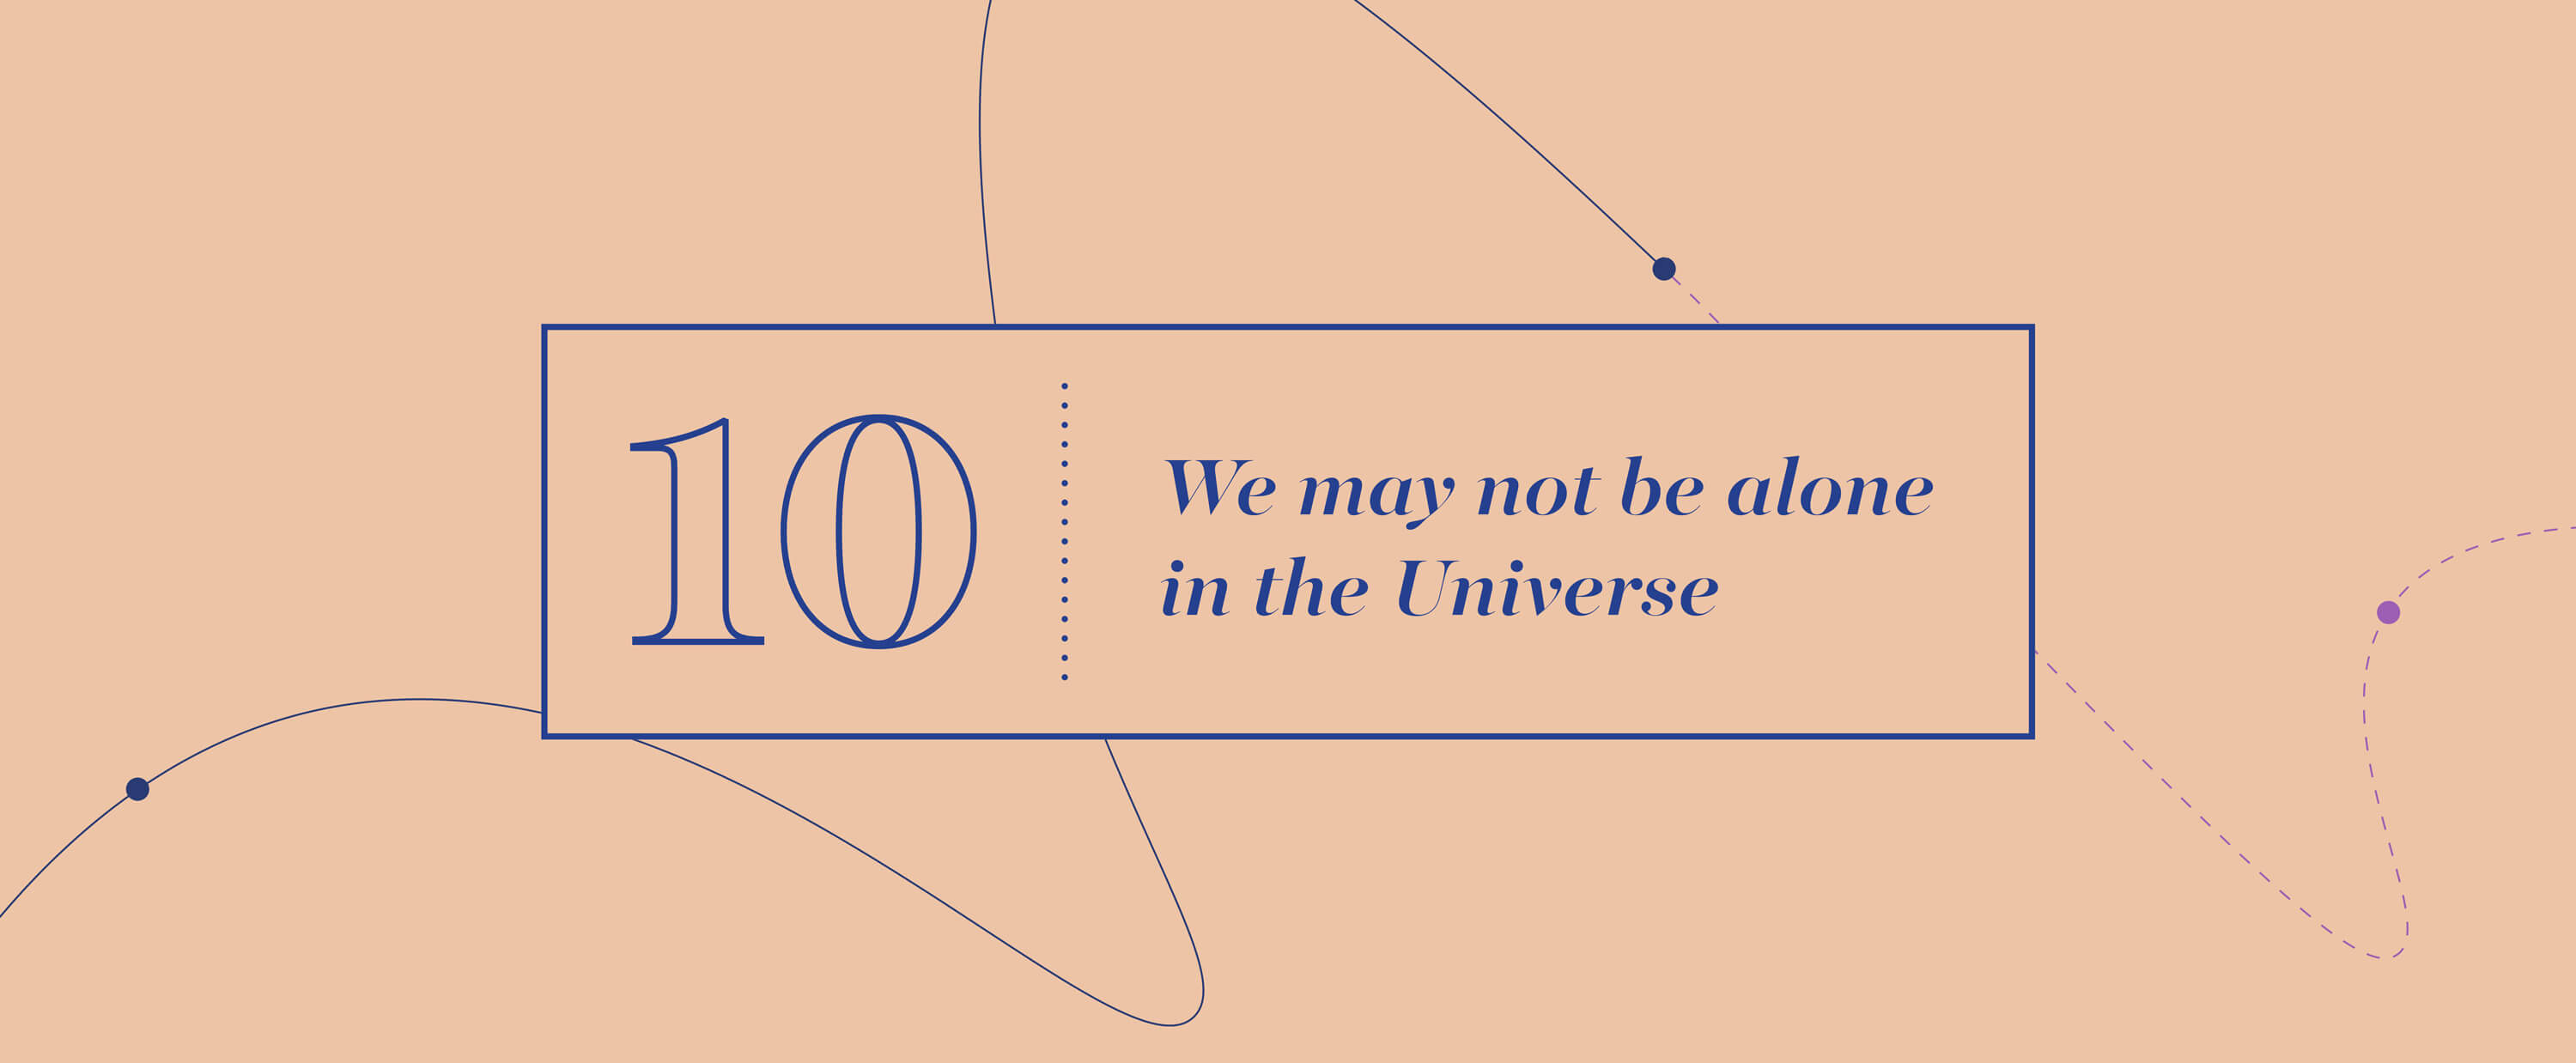 Big Idea 10 - We may not be alone in the Universe